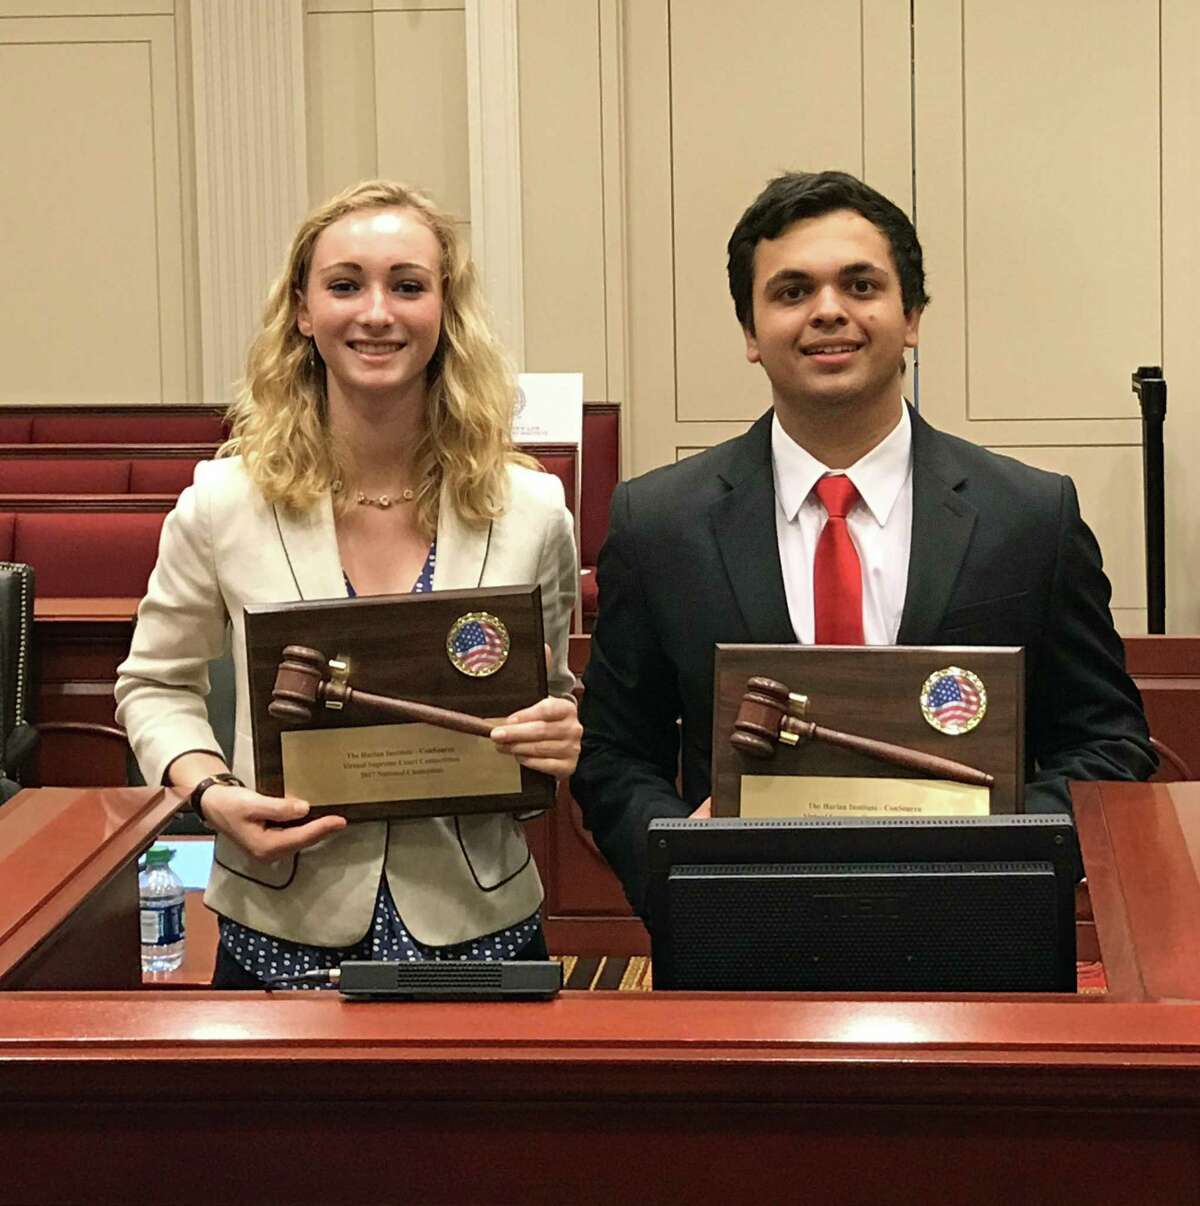 Greenwich High School students Lucy Mini (left) and Arjun Ahuja (right) claimed victory in the fifth annual National Virtual Supreme Court Competition for high school students on May 18.